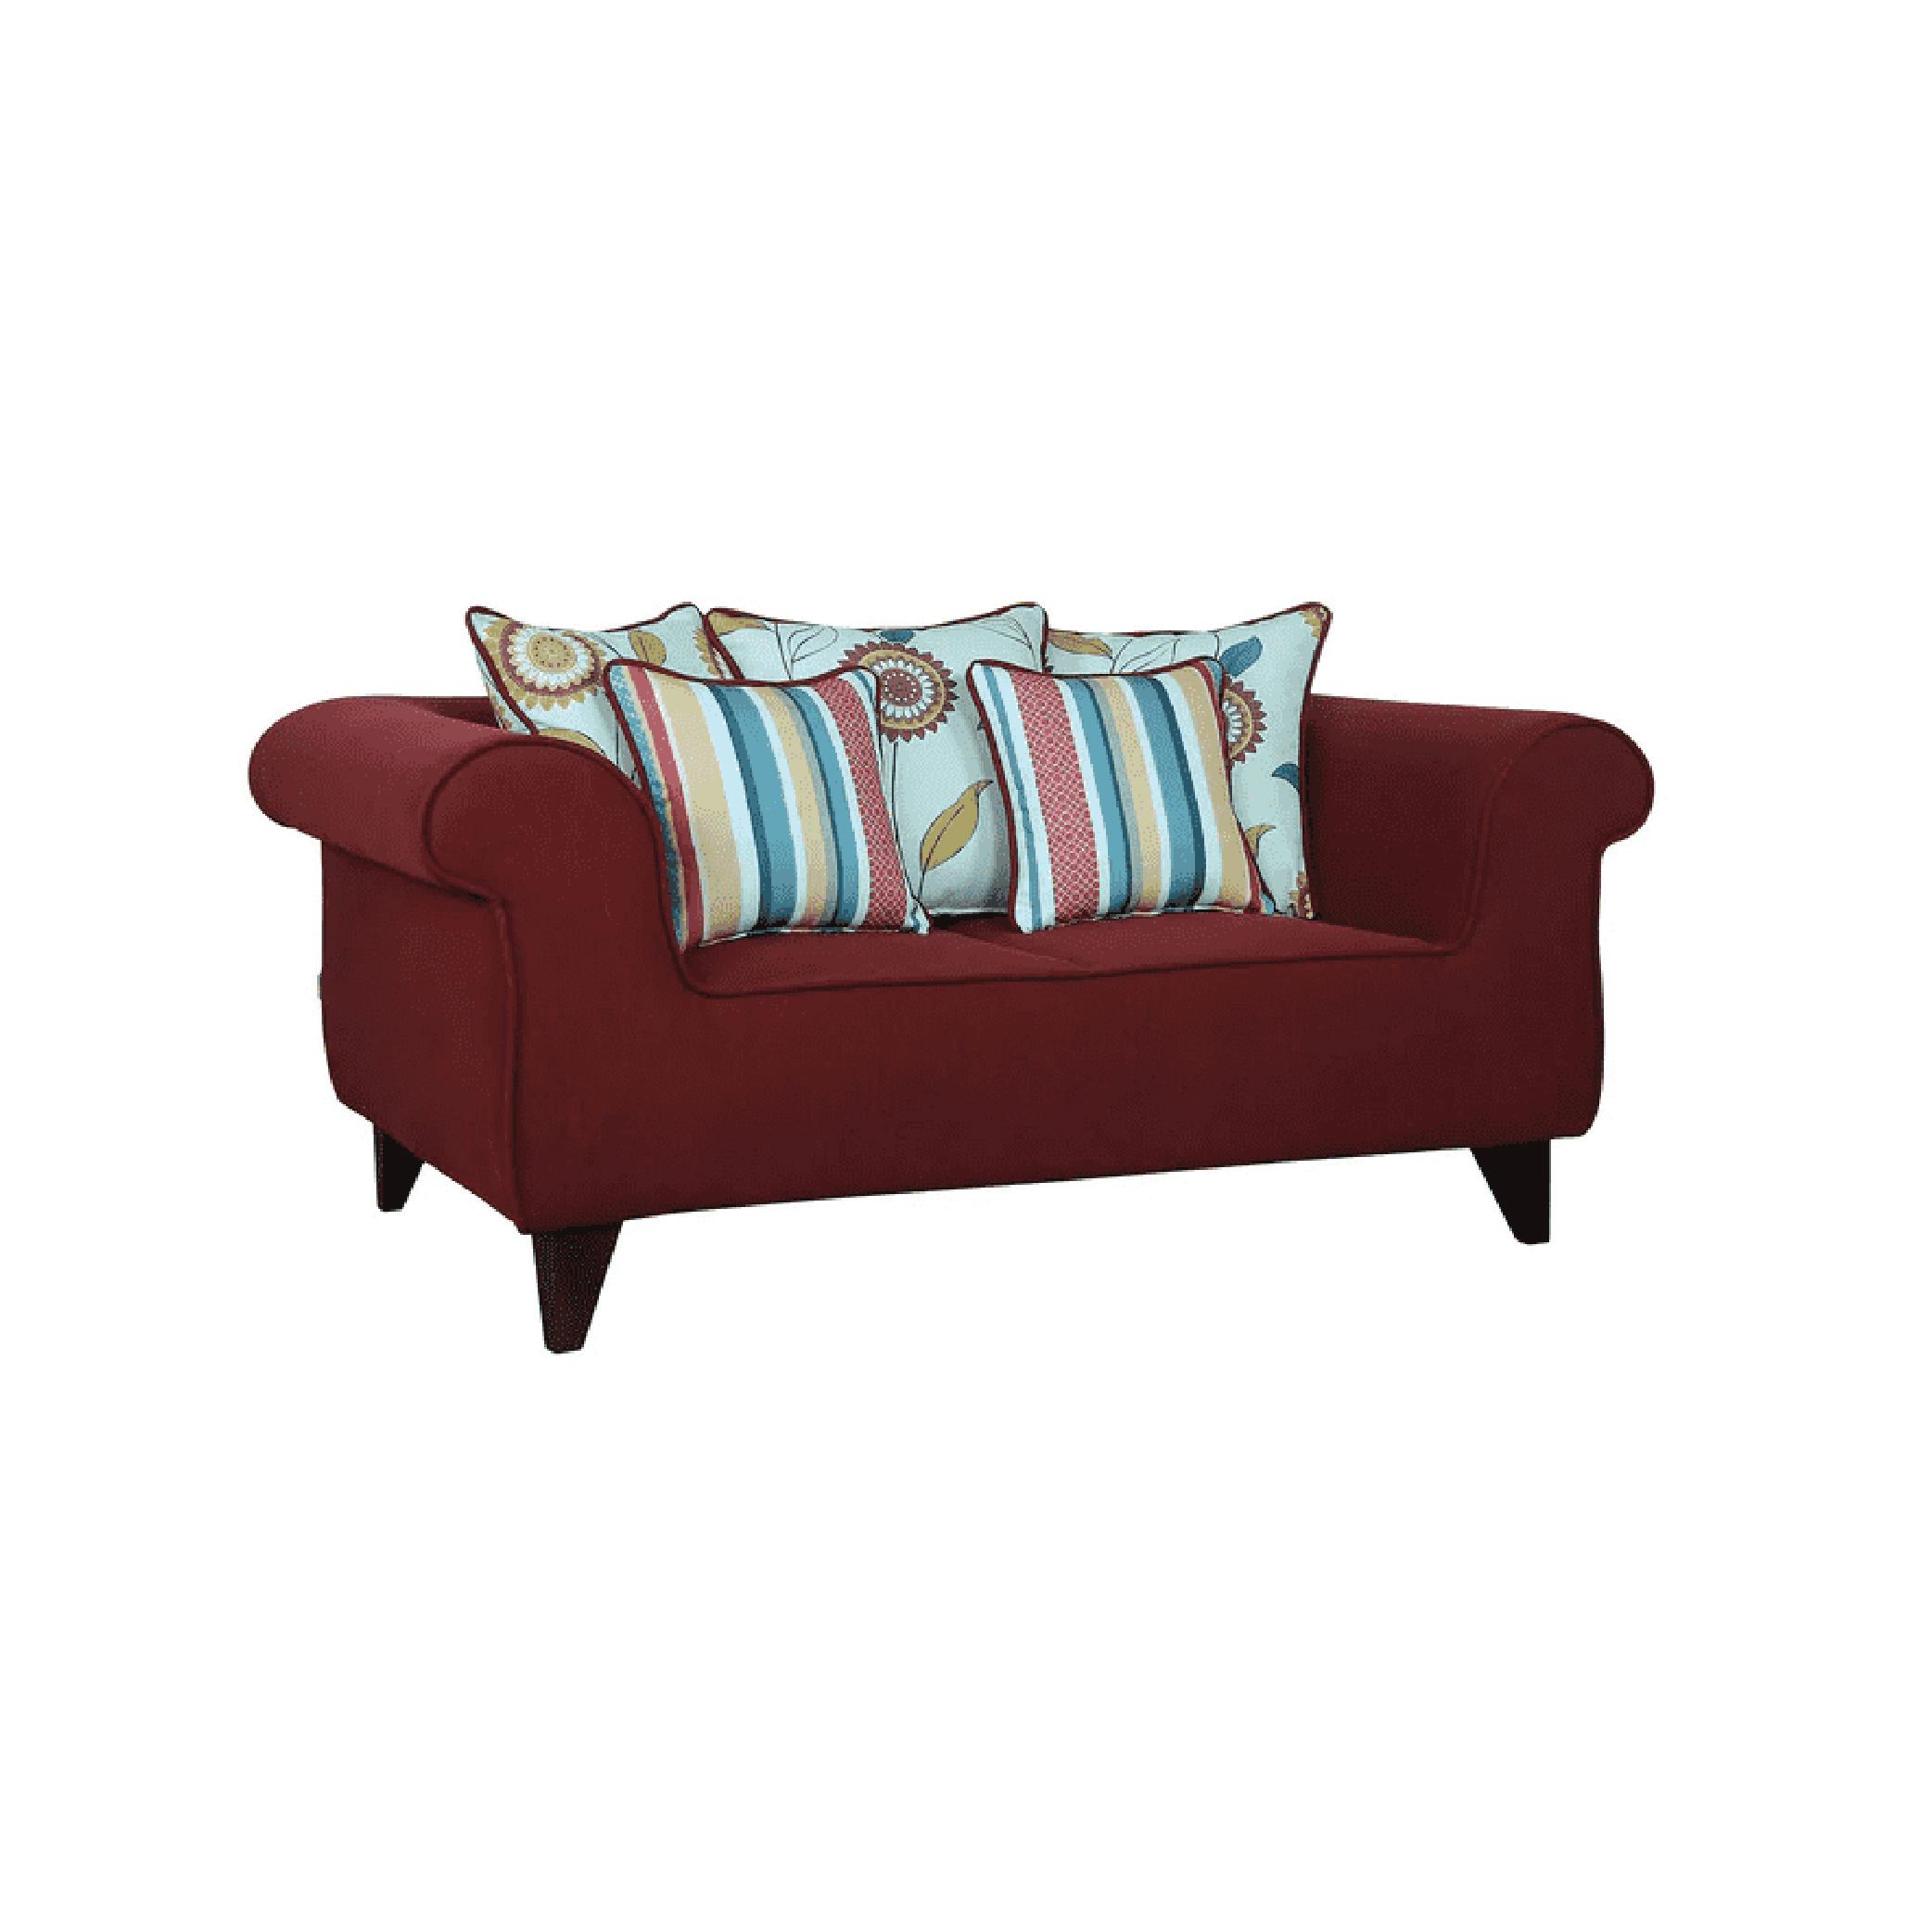 Salerno Two Seater Sofa in Garnet Red Colour